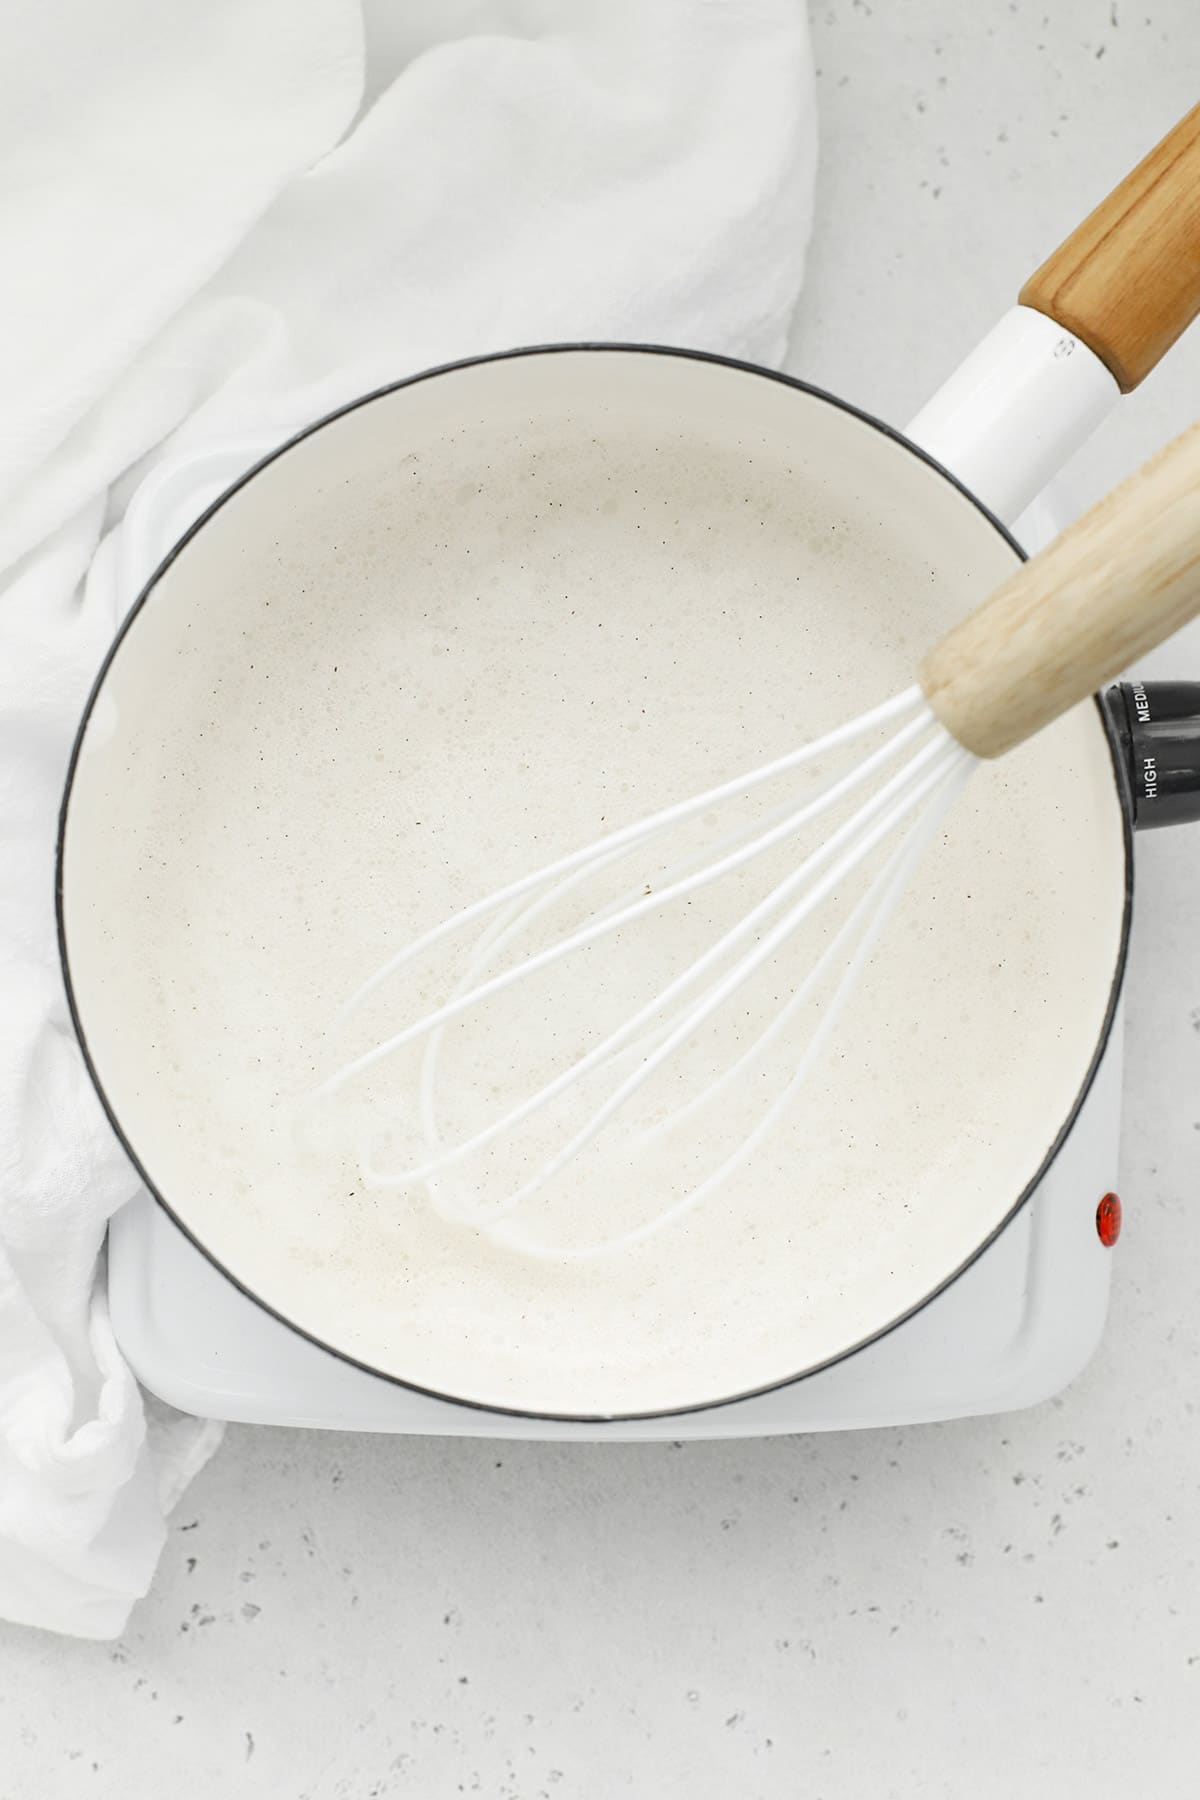 Making a vanilla steamer on the stovetop